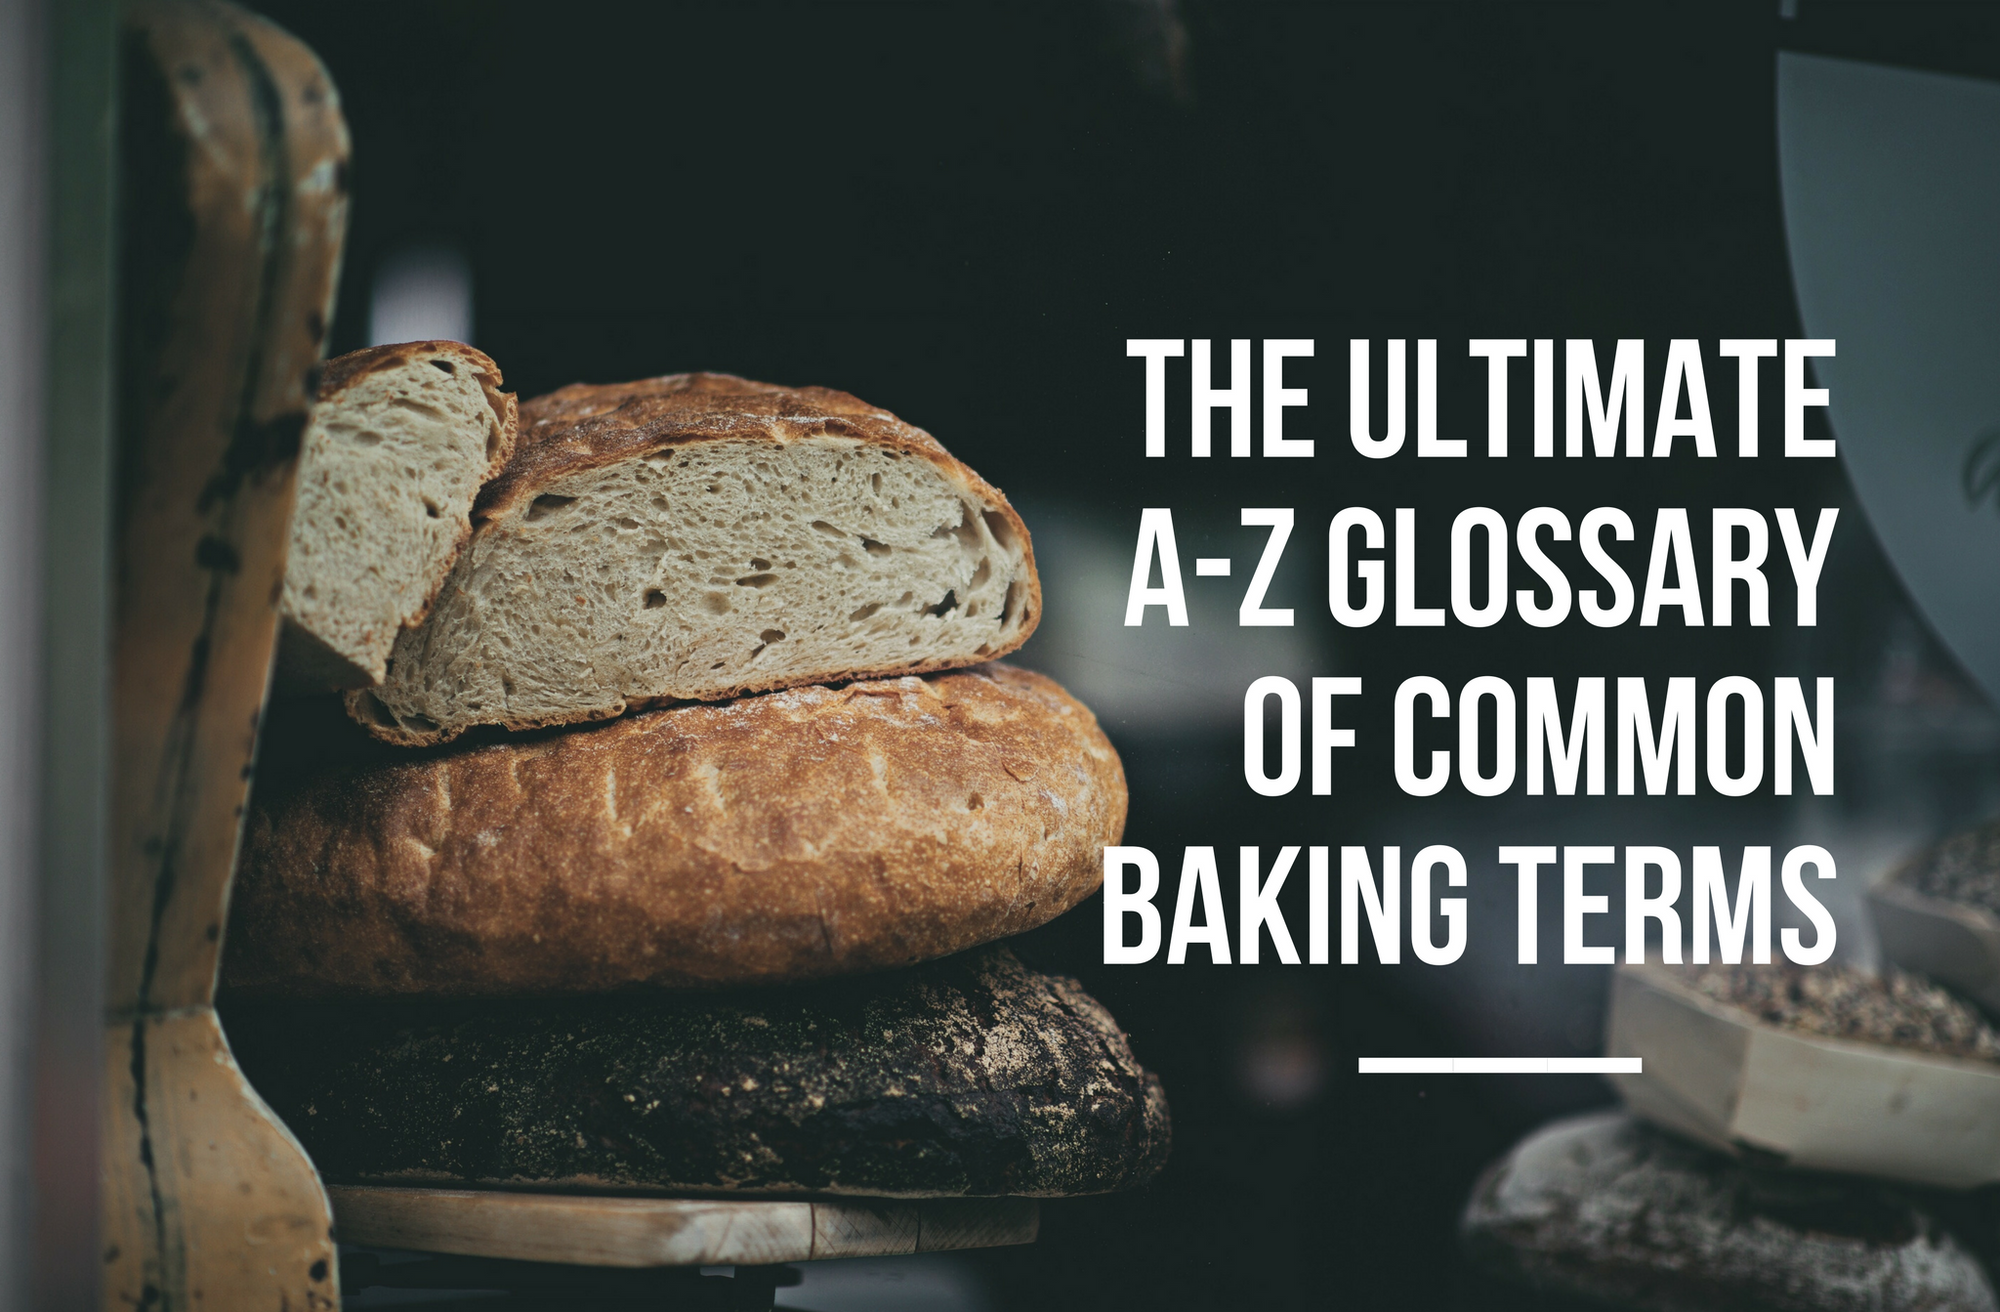 Common baking terms